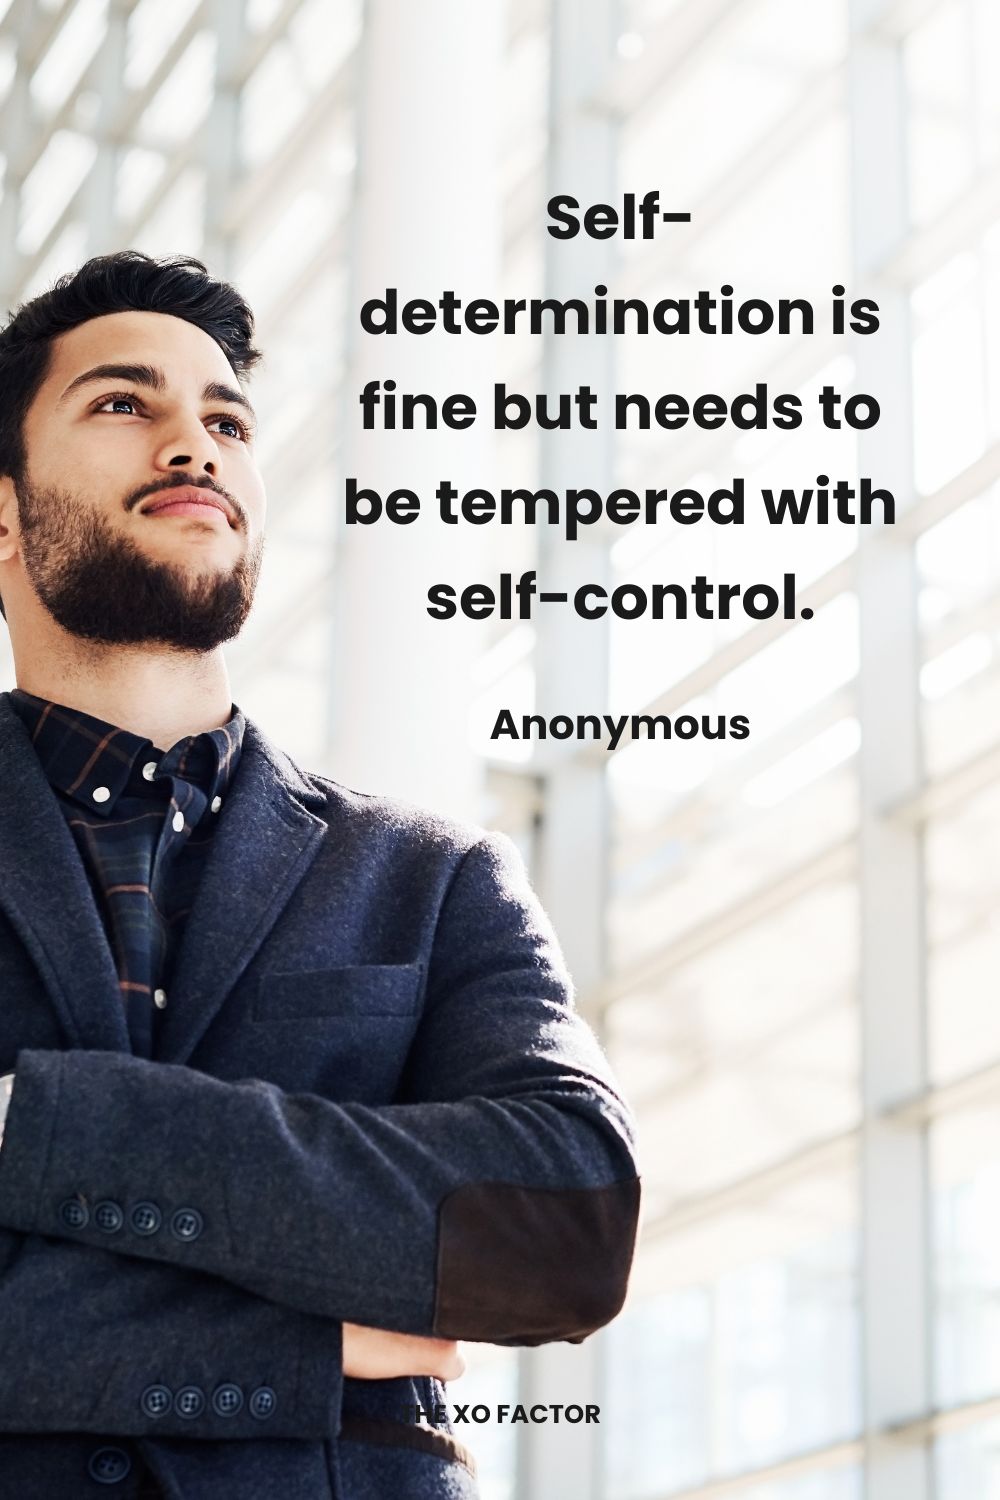 Self-determination is fine but needs to be tempered with self-control. Anonymous